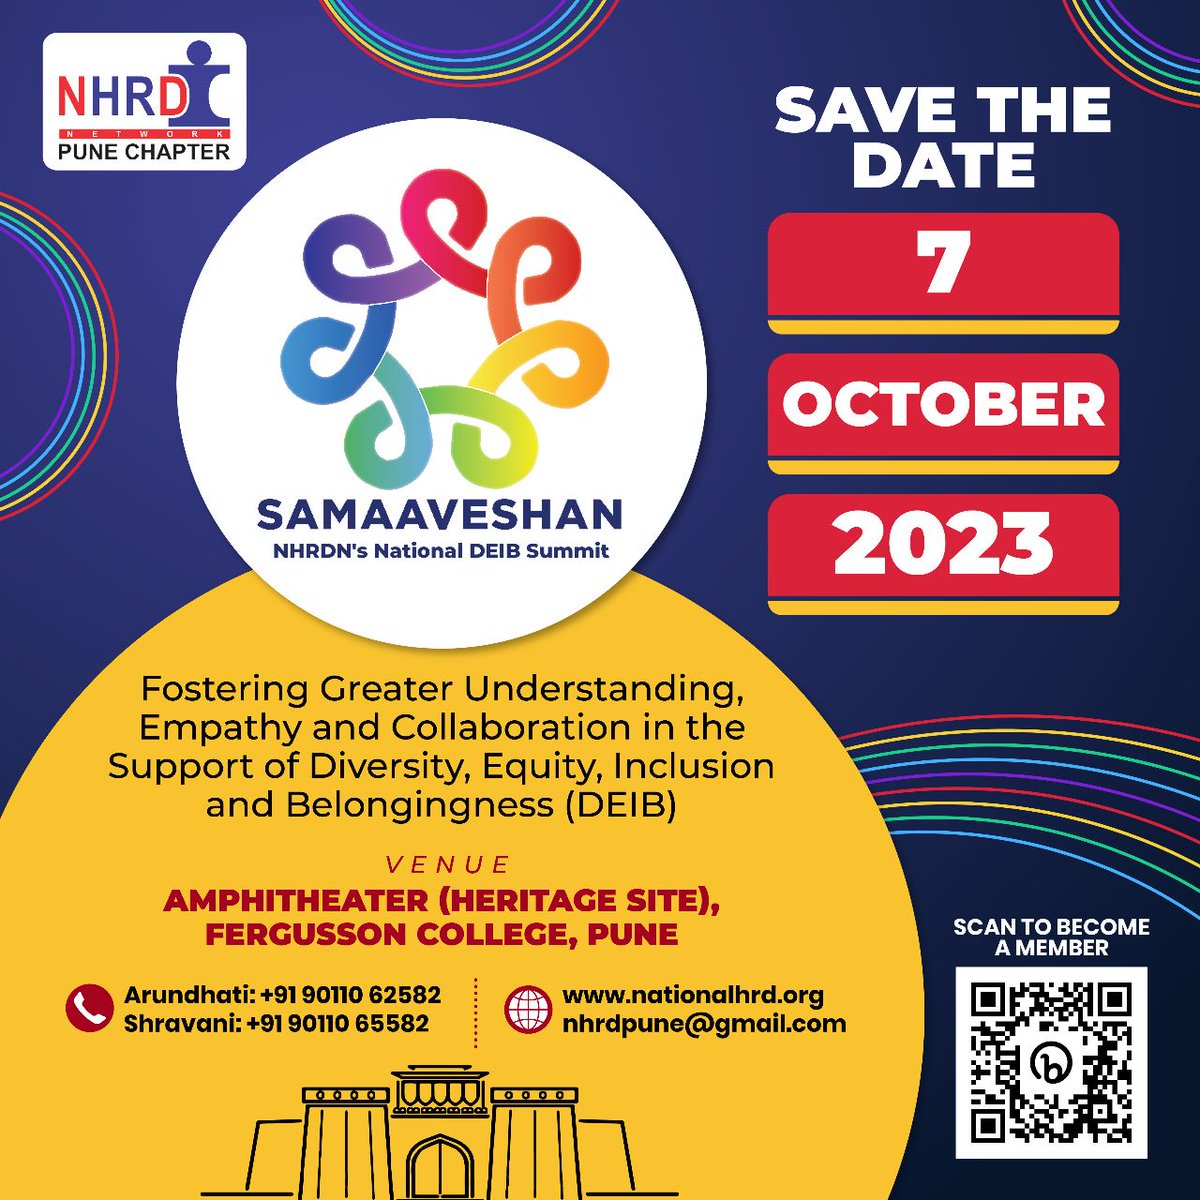 Save the new date for National HRD Network's “𝘋𝘪𝘷𝘦𝘳𝘴𝘪𝘵𝘺, 𝘌𝘲𝘶𝘪𝘵𝘺, 𝘐𝘯𝘤𝘭𝘶𝘴𝘪𝘰𝘯 𝘢𝘯𝘥 𝘉𝘦𝘭𝘰𝘯𝘨𝘪𝘯𝘨𝘯𝘦𝘴𝘴 (𝘋𝘌𝘐𝘉)” Summit 2023 on 𝗦𝗮𝘁𝘂𝗿𝗱𝗮𝘆, 𝟳𝘁𝗵 𝗢𝗰𝘁𝗼𝗯𝗲𝗿. #Diversity #Inclusive #Equity #NHRDN #DEISummit #Summit2023